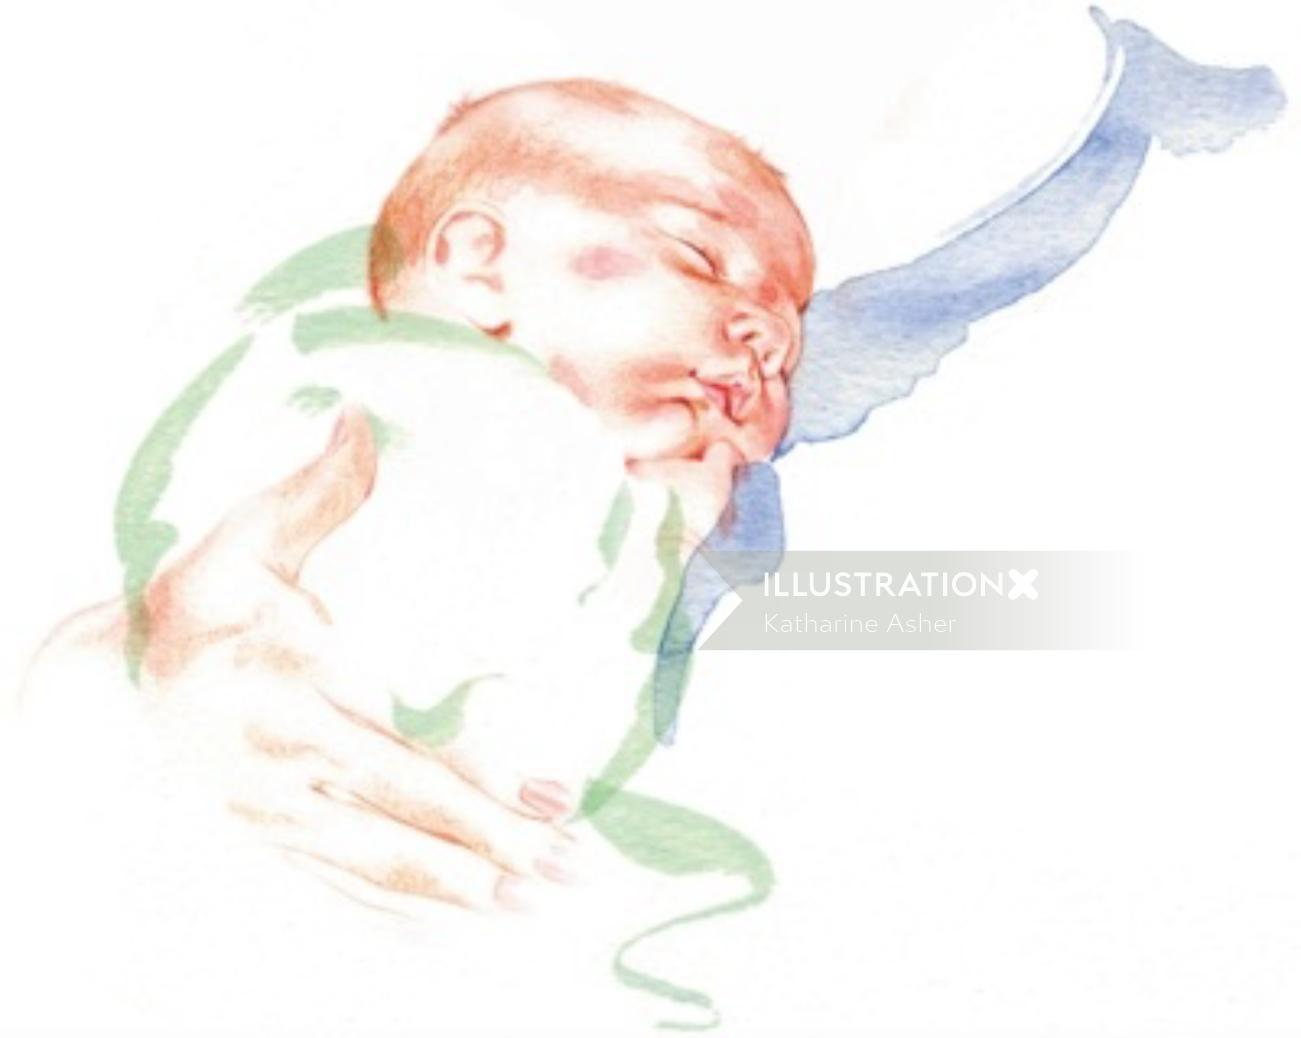 watercolor illustration of new born baby for NHS maternity wards